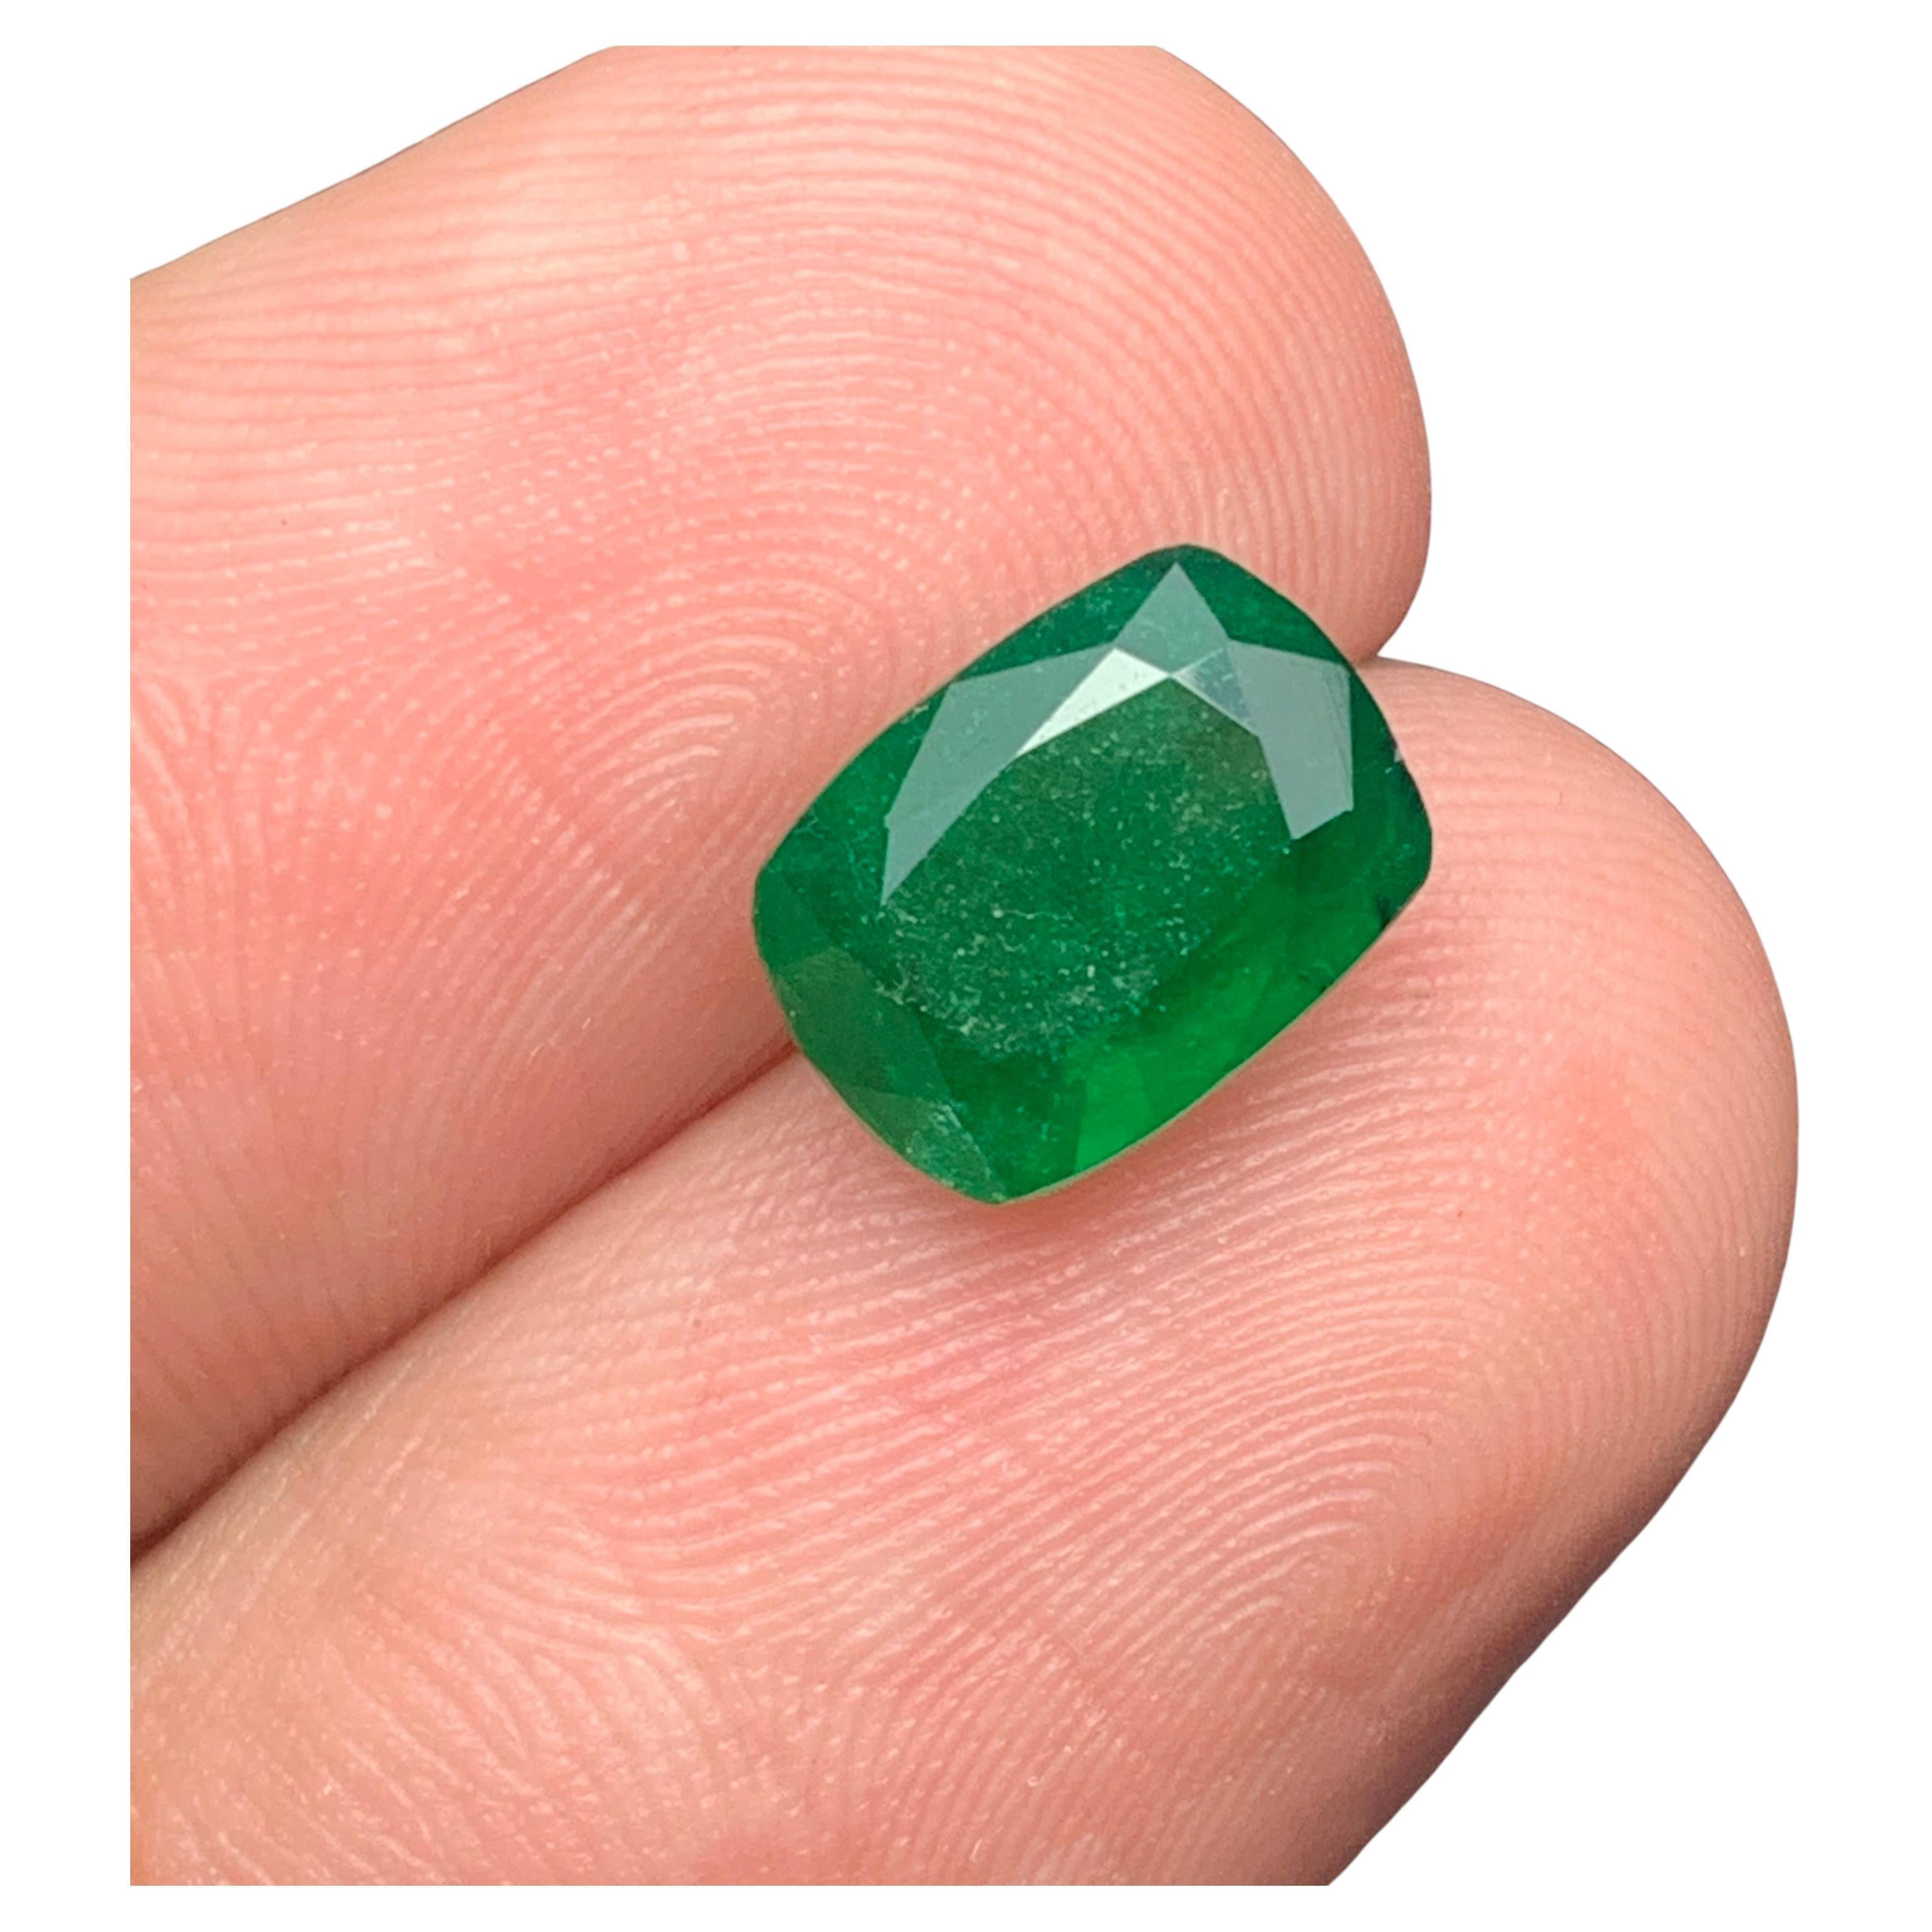 Gorgeous Certified Natural Green Emerald from Swat Pakistan Mine 1.96 Carat